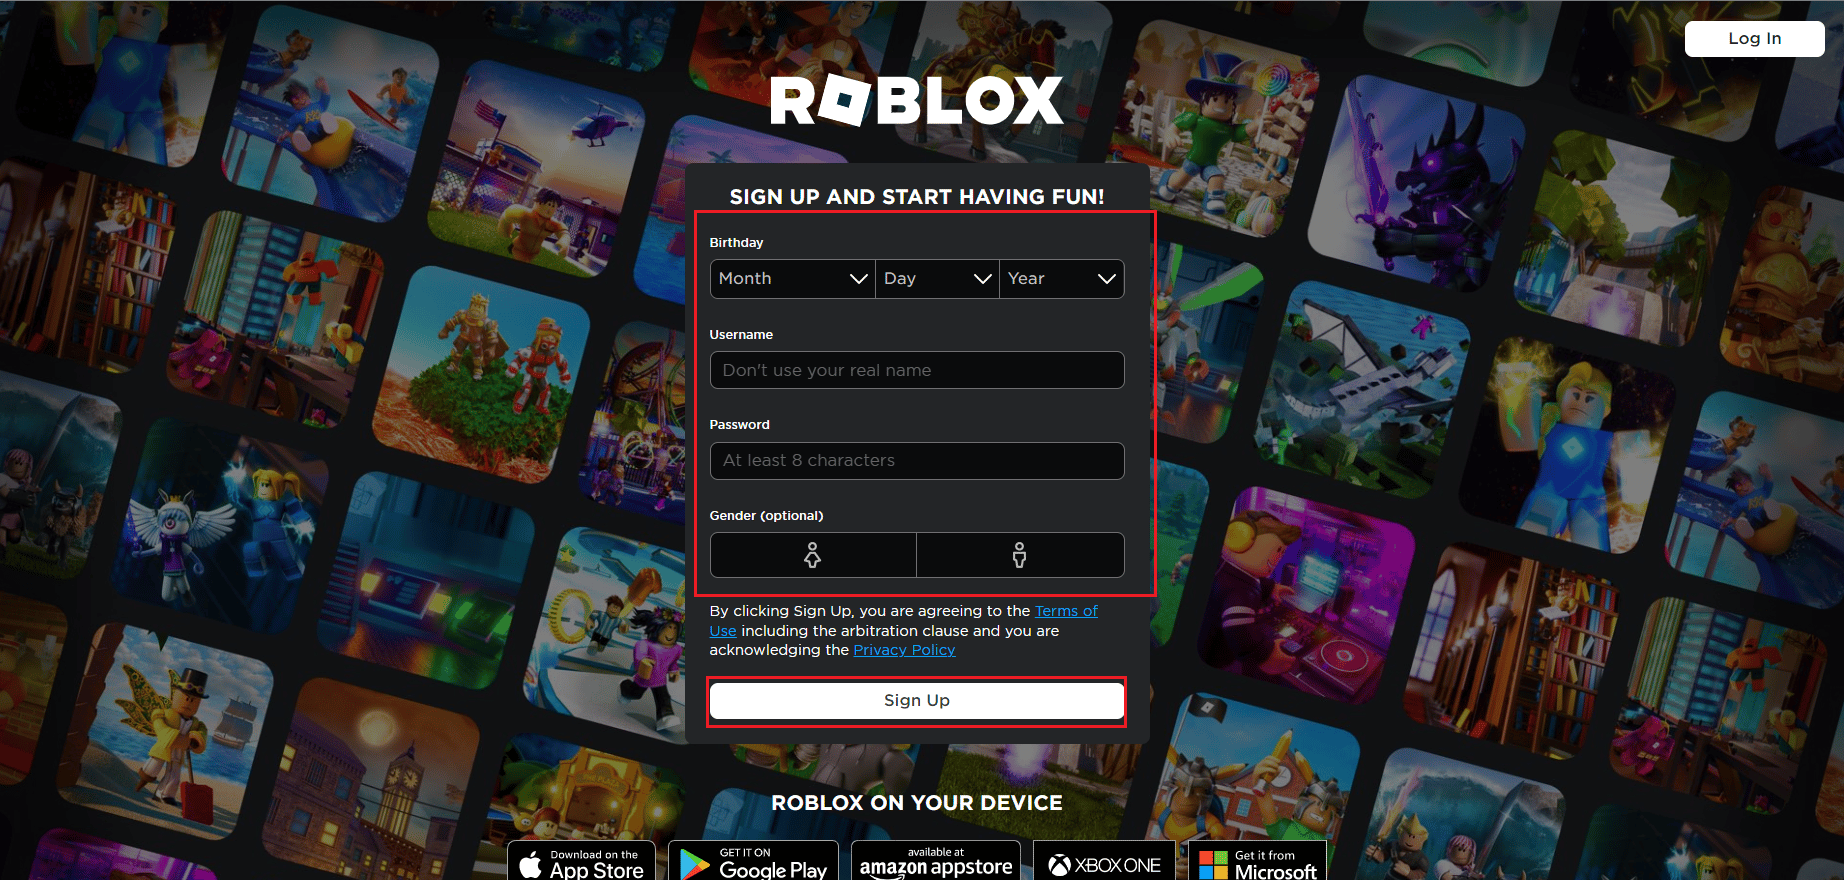 Roblox Sign Up page